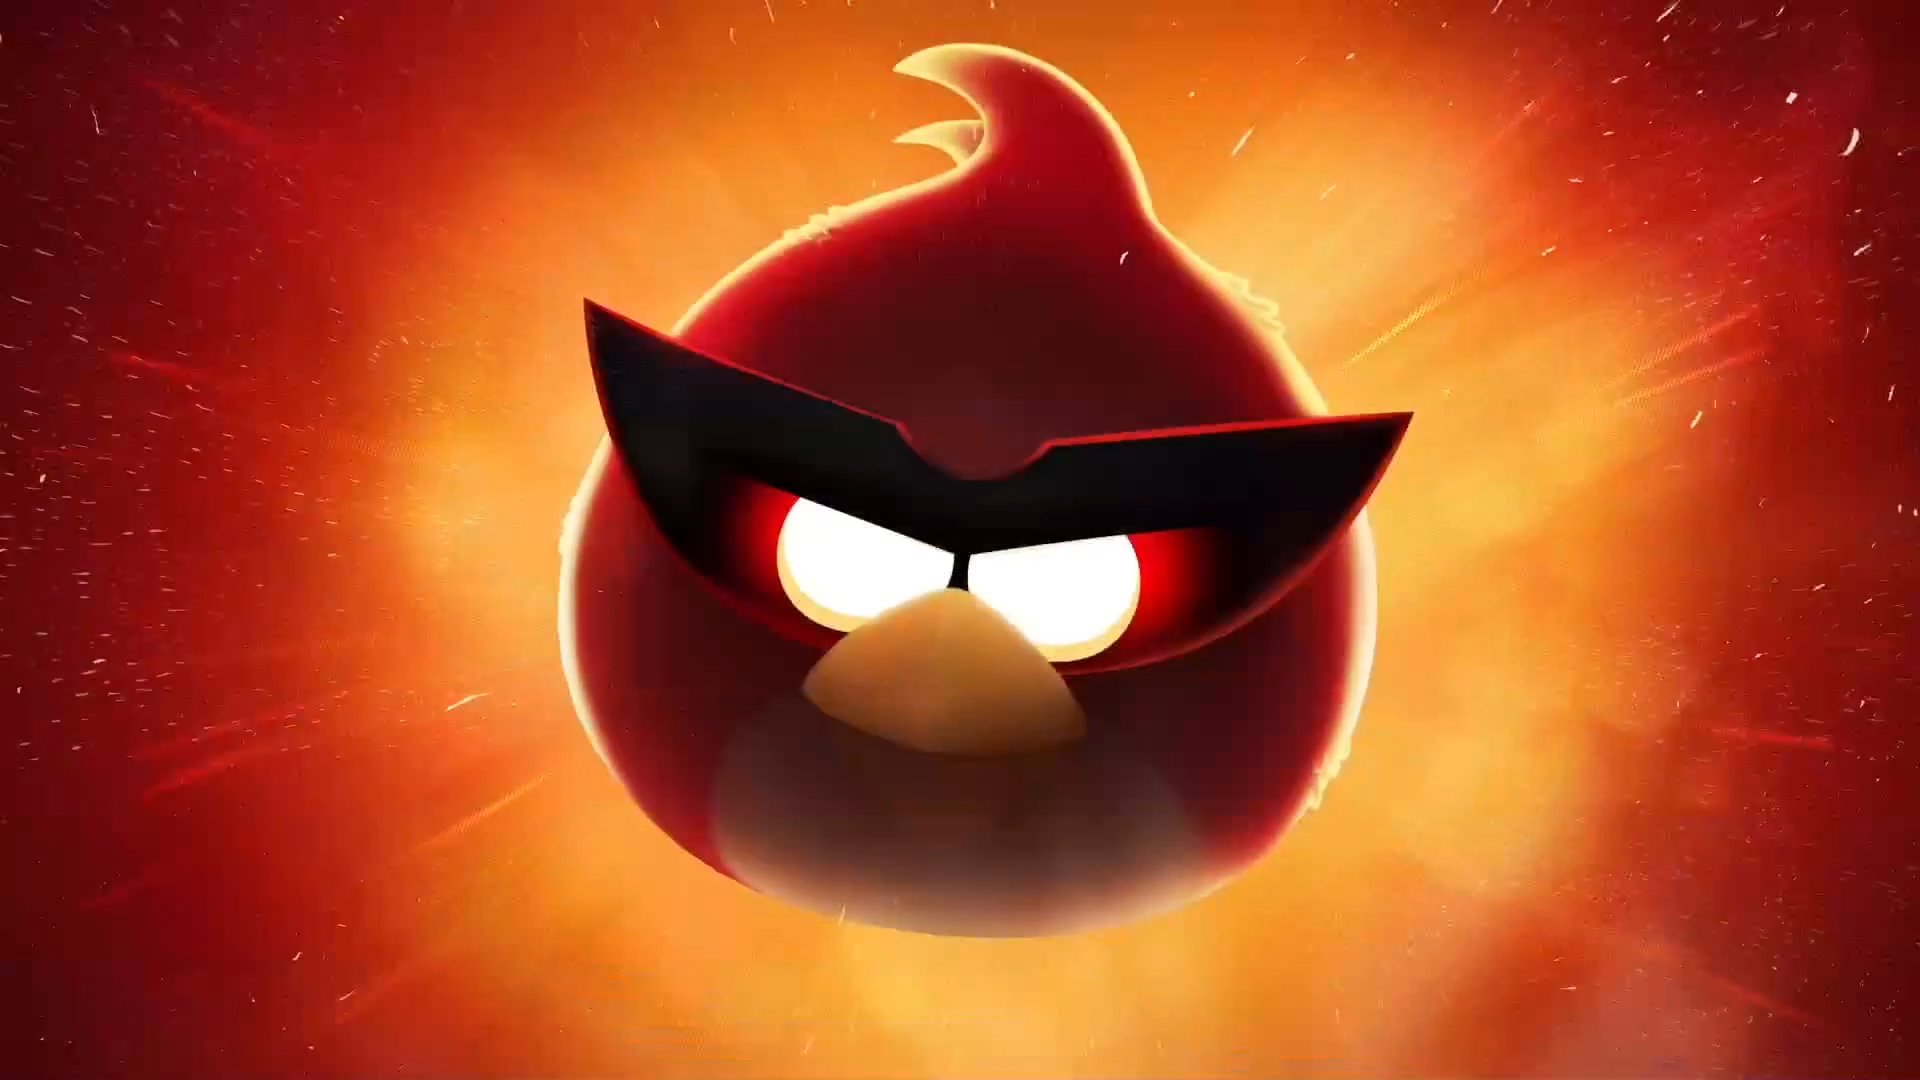 Angry Birds Desktop Wallpaper. Angry Birds New Image. Cool